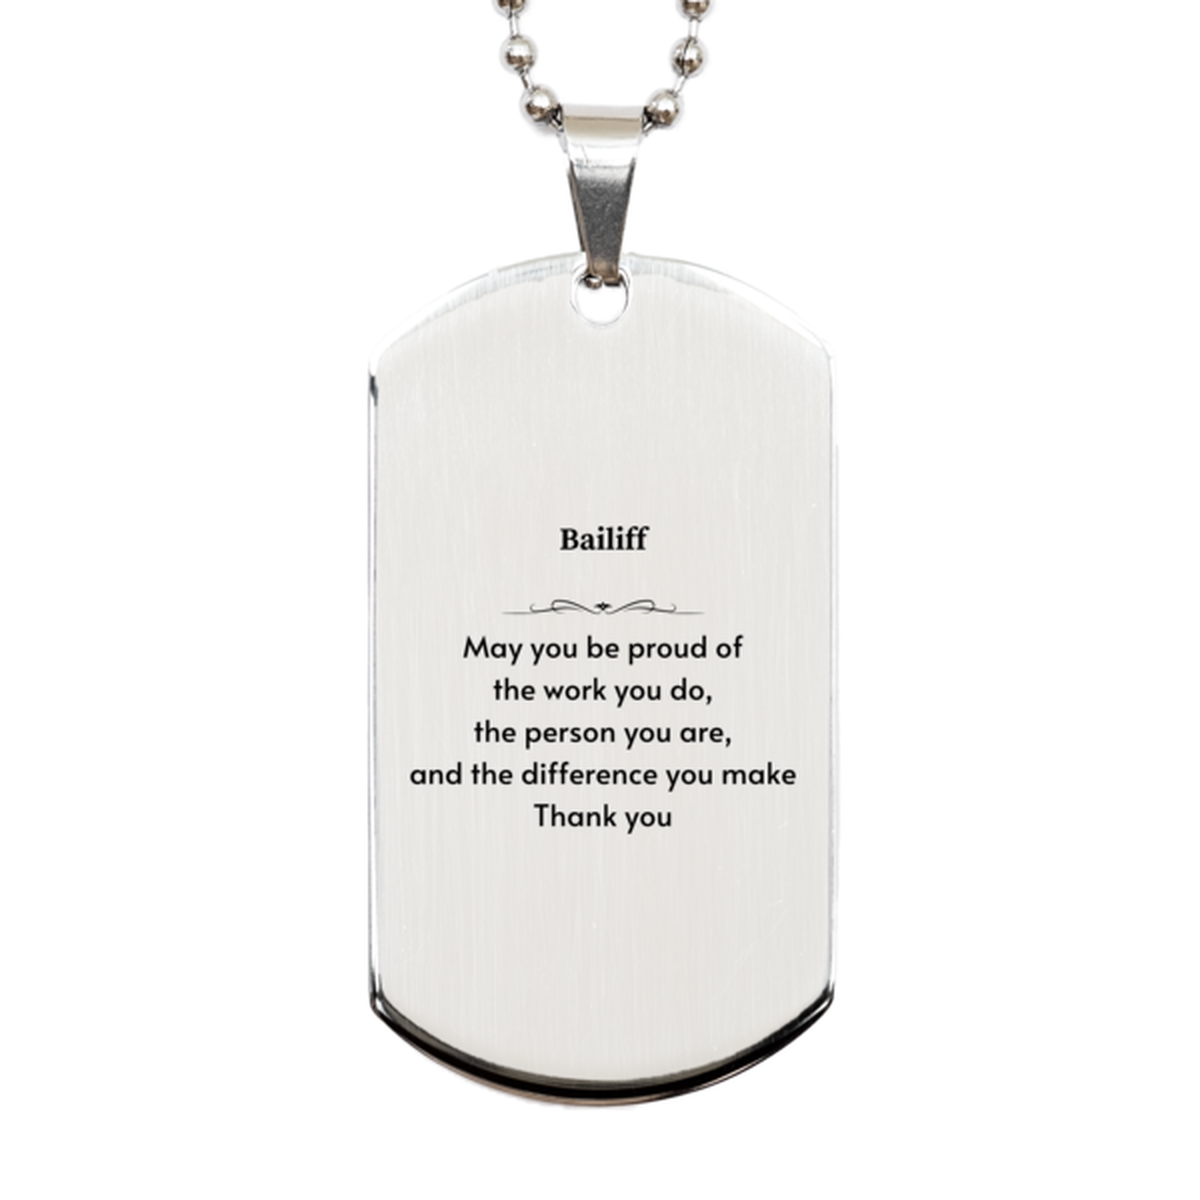 Heartwarming Silver Dog Tag Retirement Coworkers Gifts for Bailiff, Bailiff May You be proud of the work you do, the person you are Gifts for Boss Men Women Friends